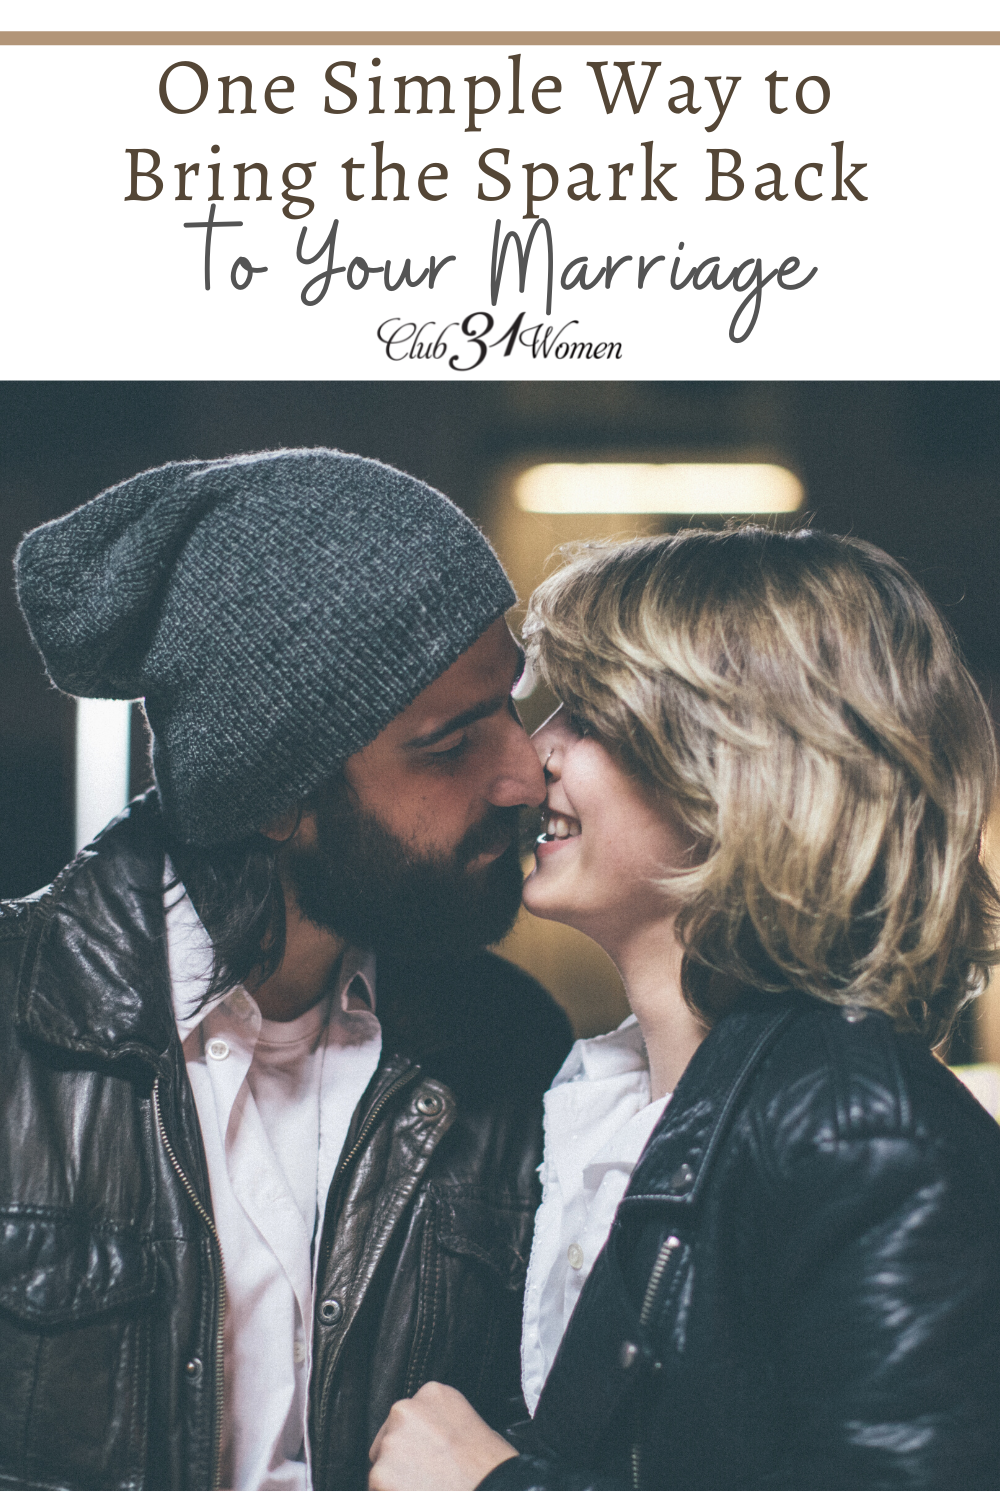 There is one simple thing that can really help bring that spark back into your marriage. Will you take the next step in igniting it? via @Club31Women